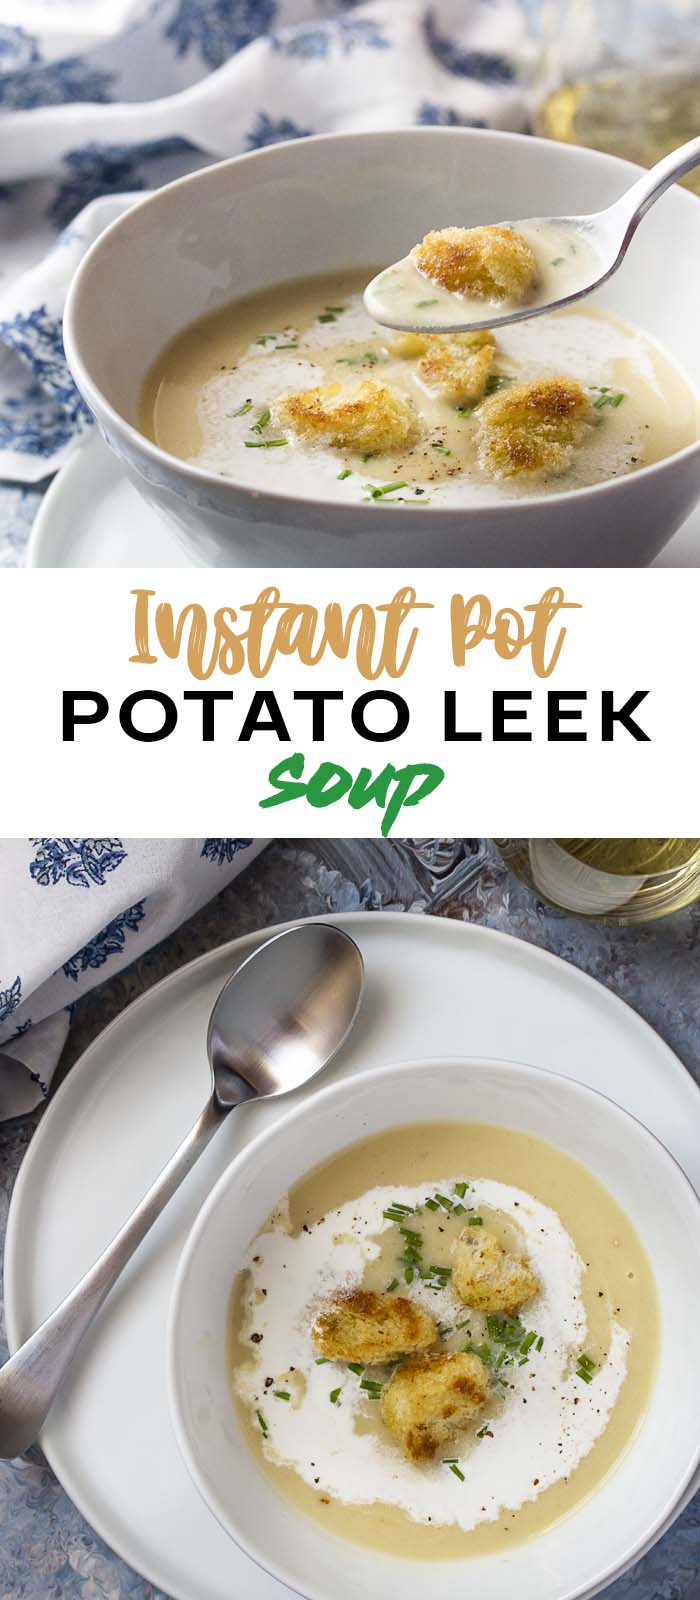 Potato soup in a white bowl with a spoon with text overlay - Potato Leek Soup.